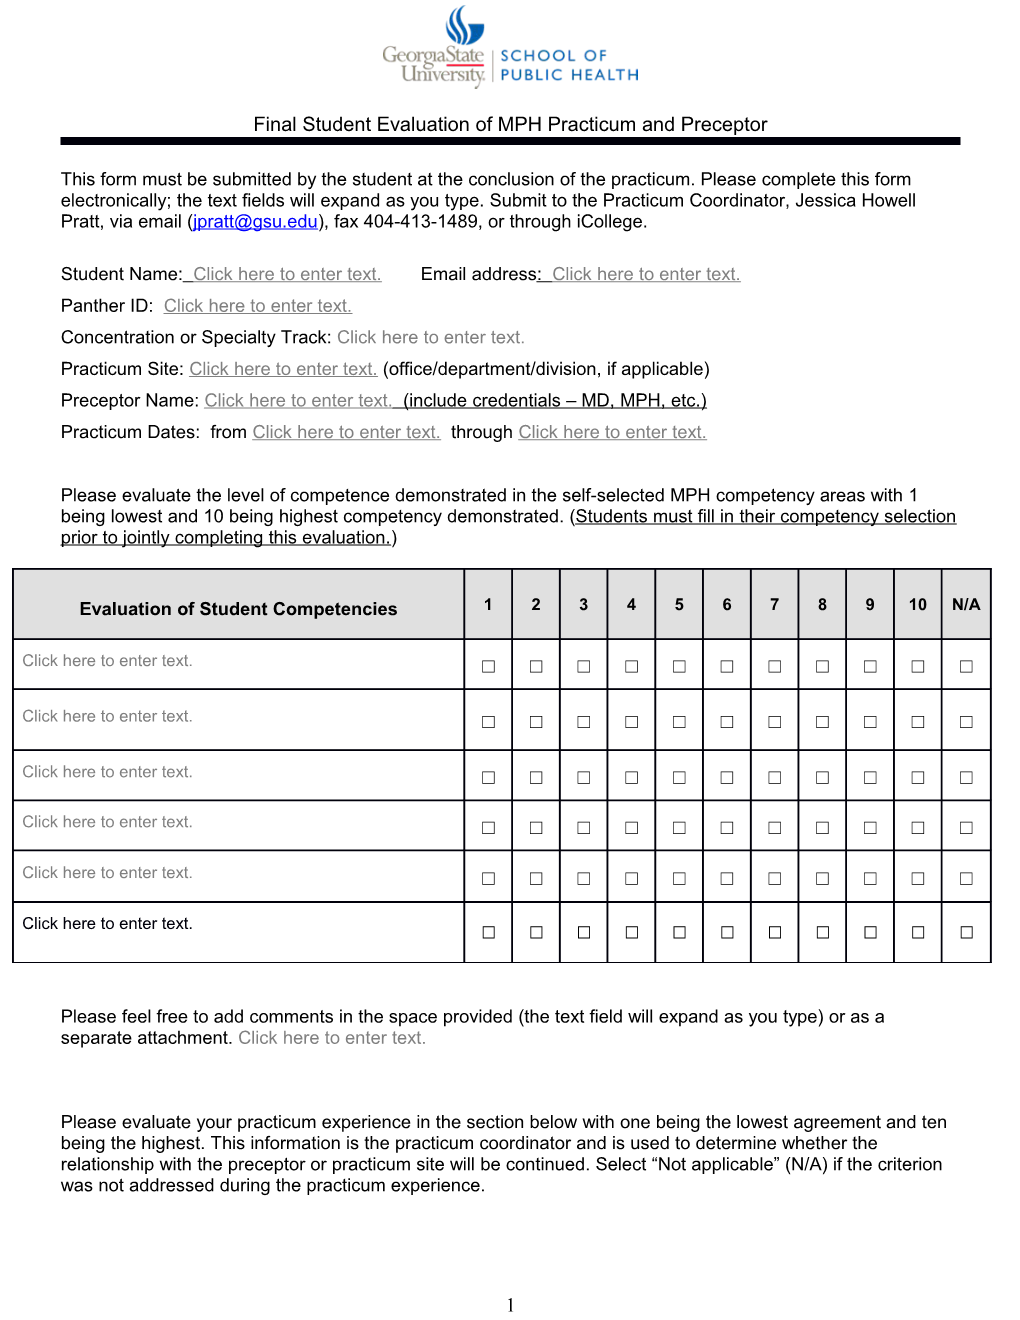 MPH Professional Experience Evaluation Form s2